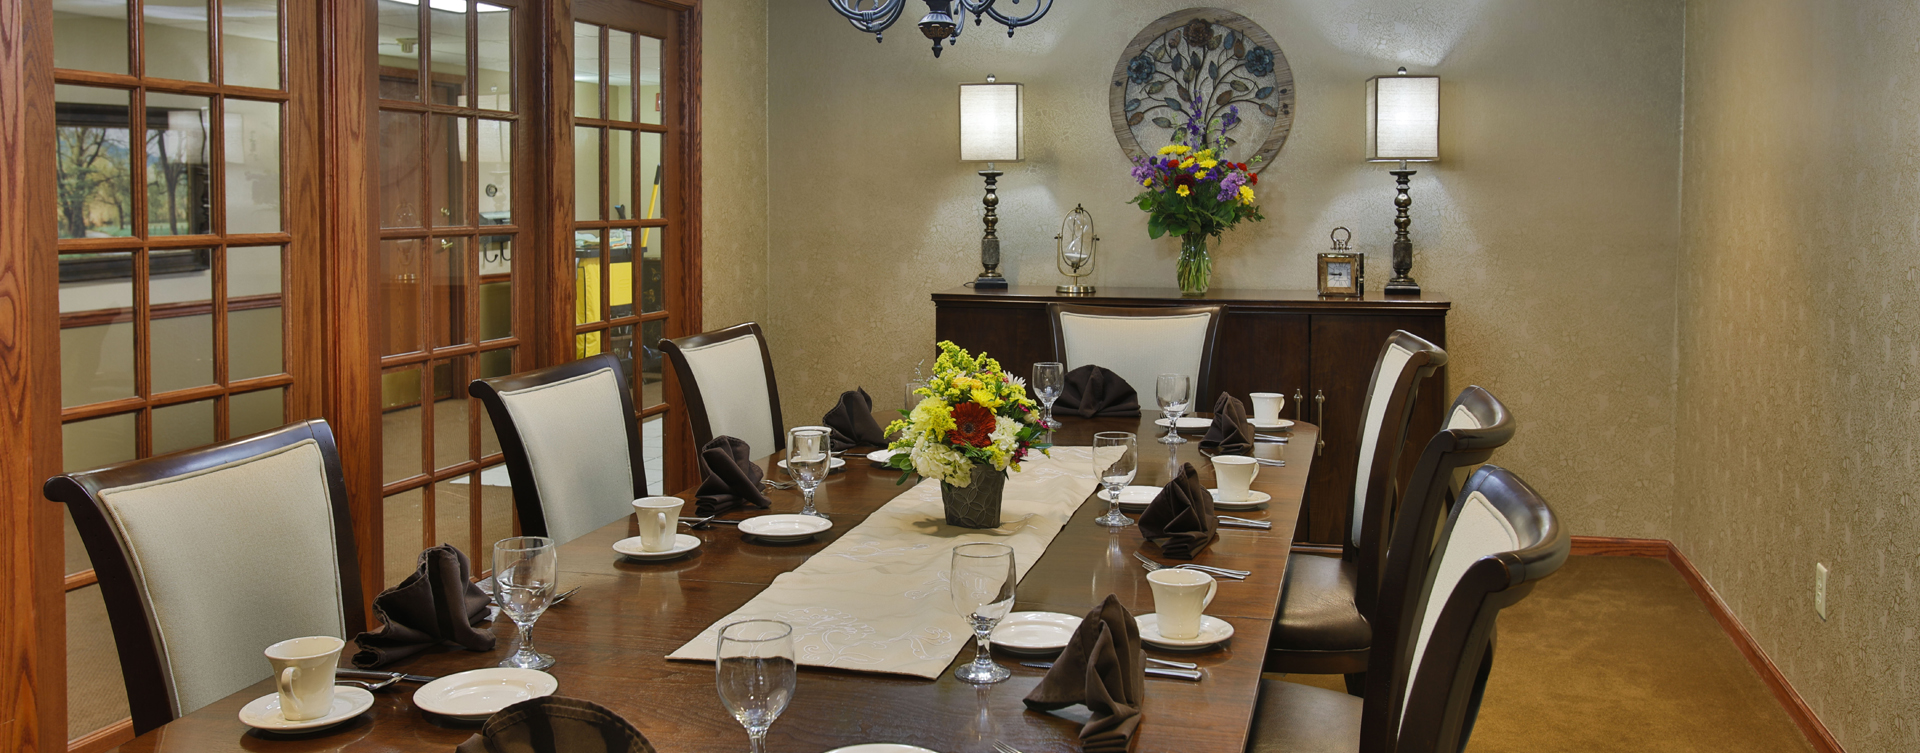 Have fun with themed and holiday meals in the private dining room at Bickford of Bloomington